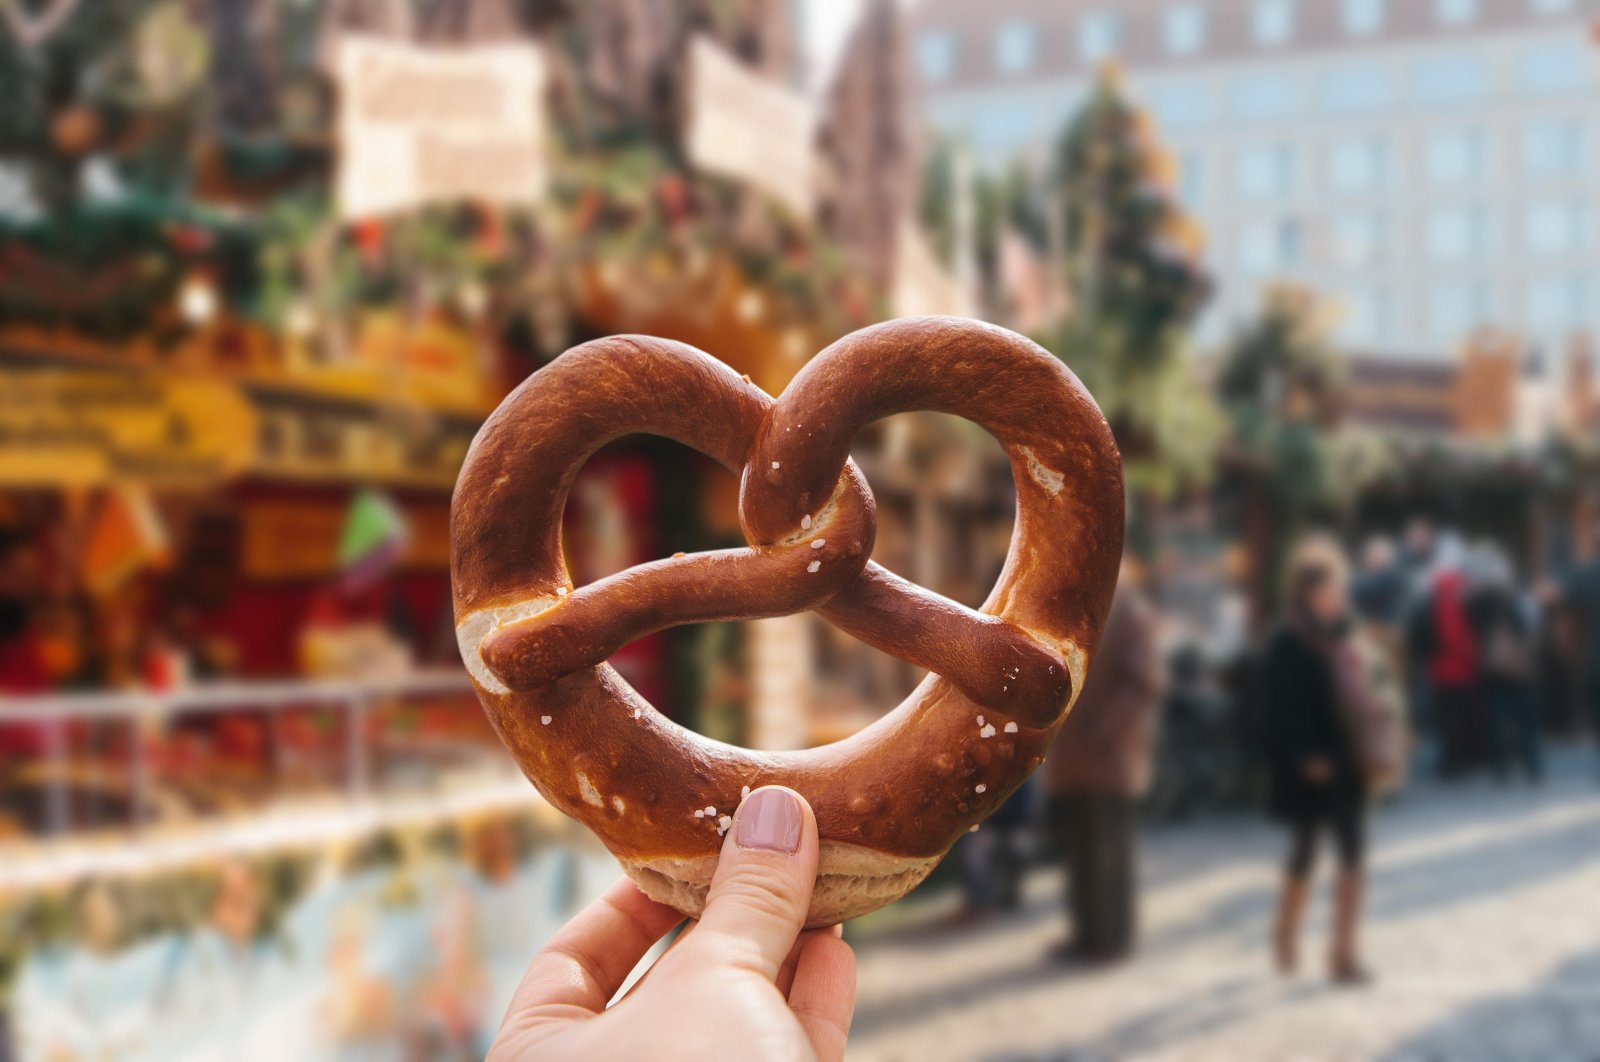 A girl holds a baked pretzel at a traditional Christmas market in Germany, Dec. 19, 2016. (Reuters File Photo)